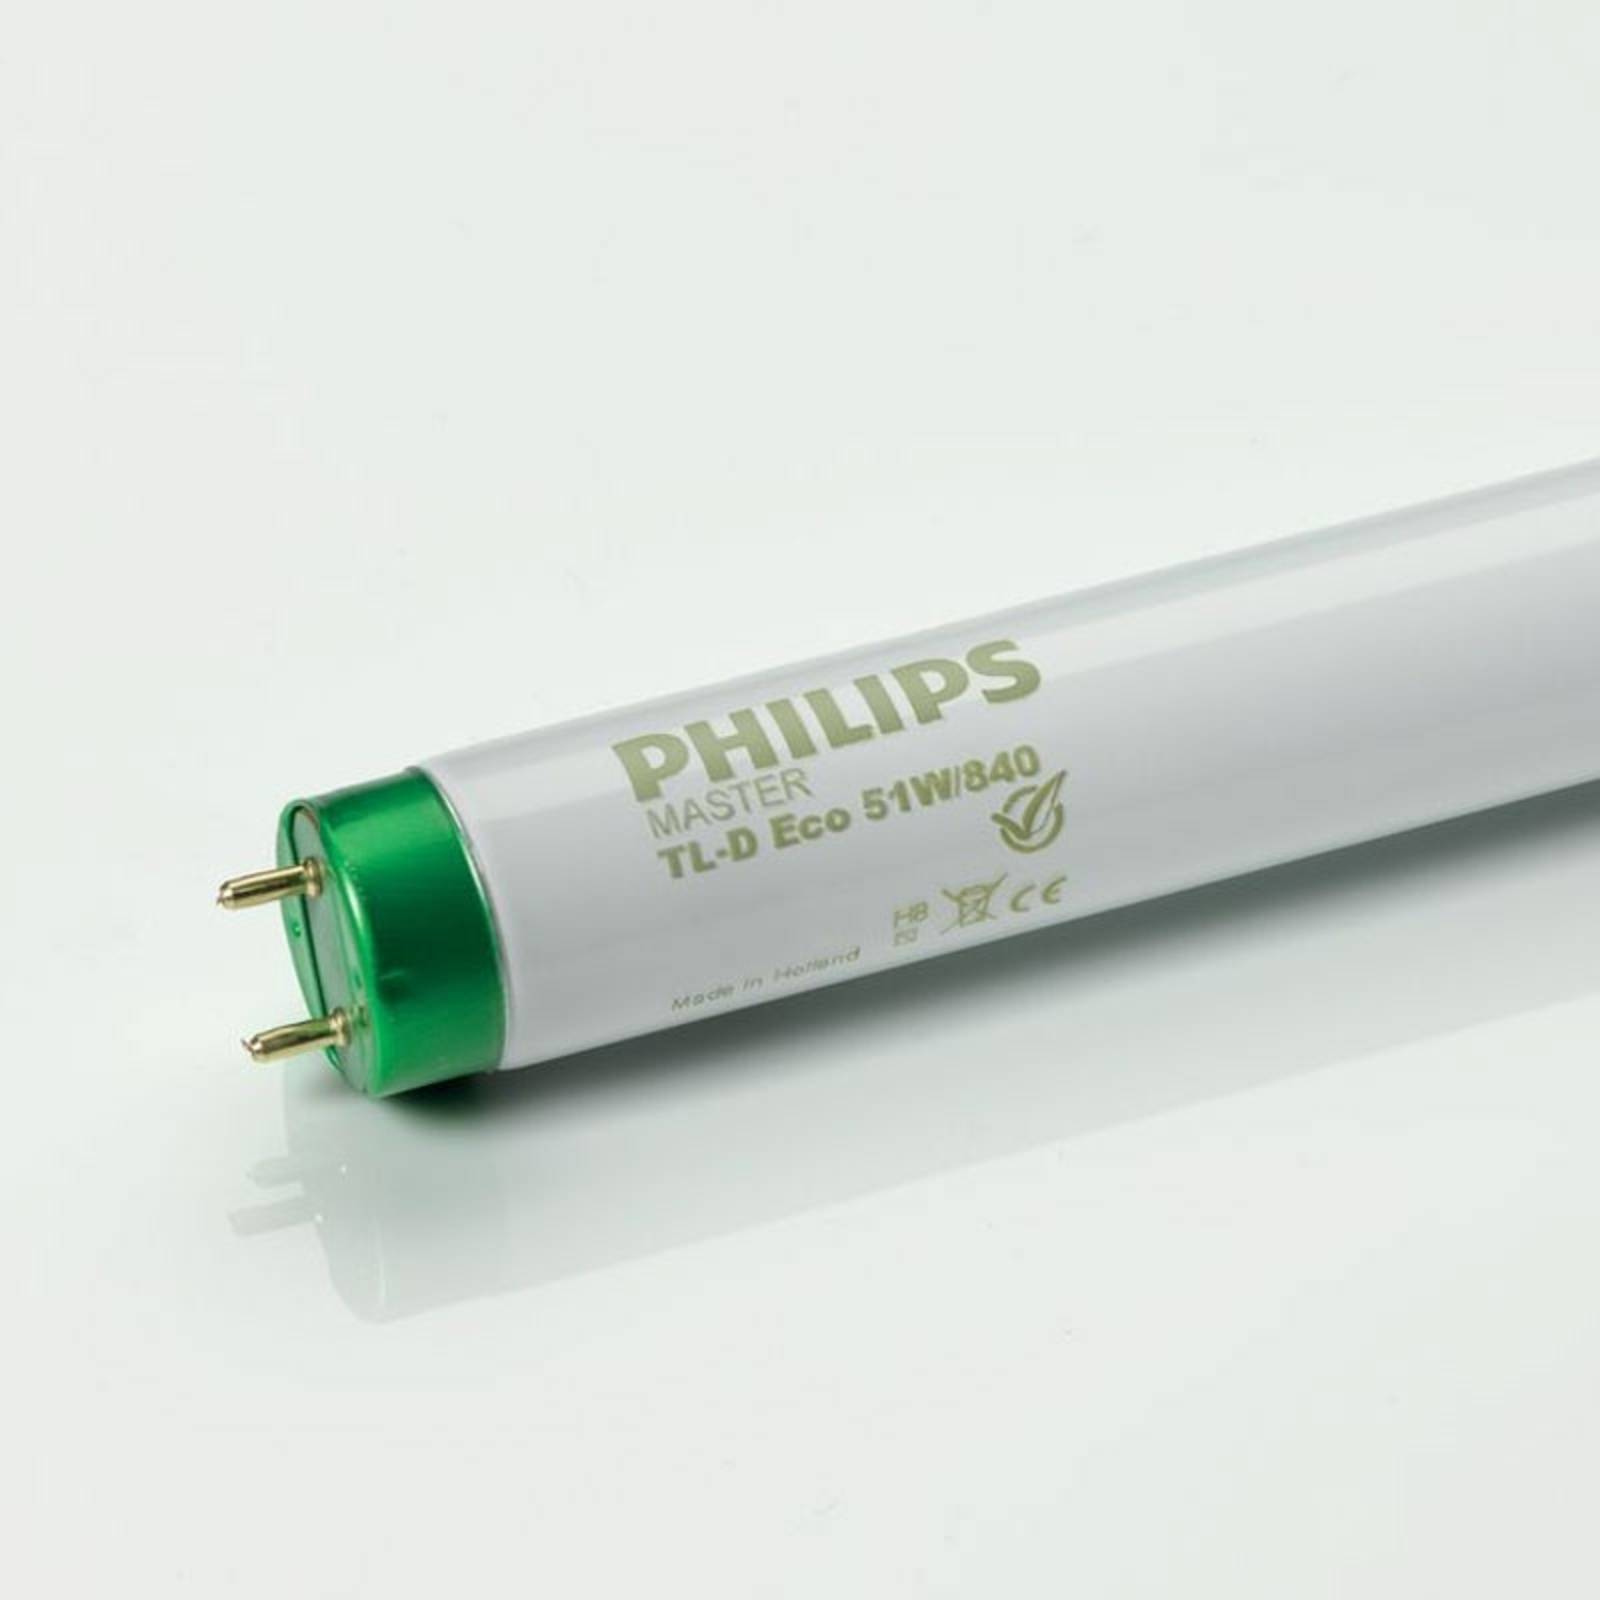 Image of Philips Master TL-D Eco G13 T8 32W 840